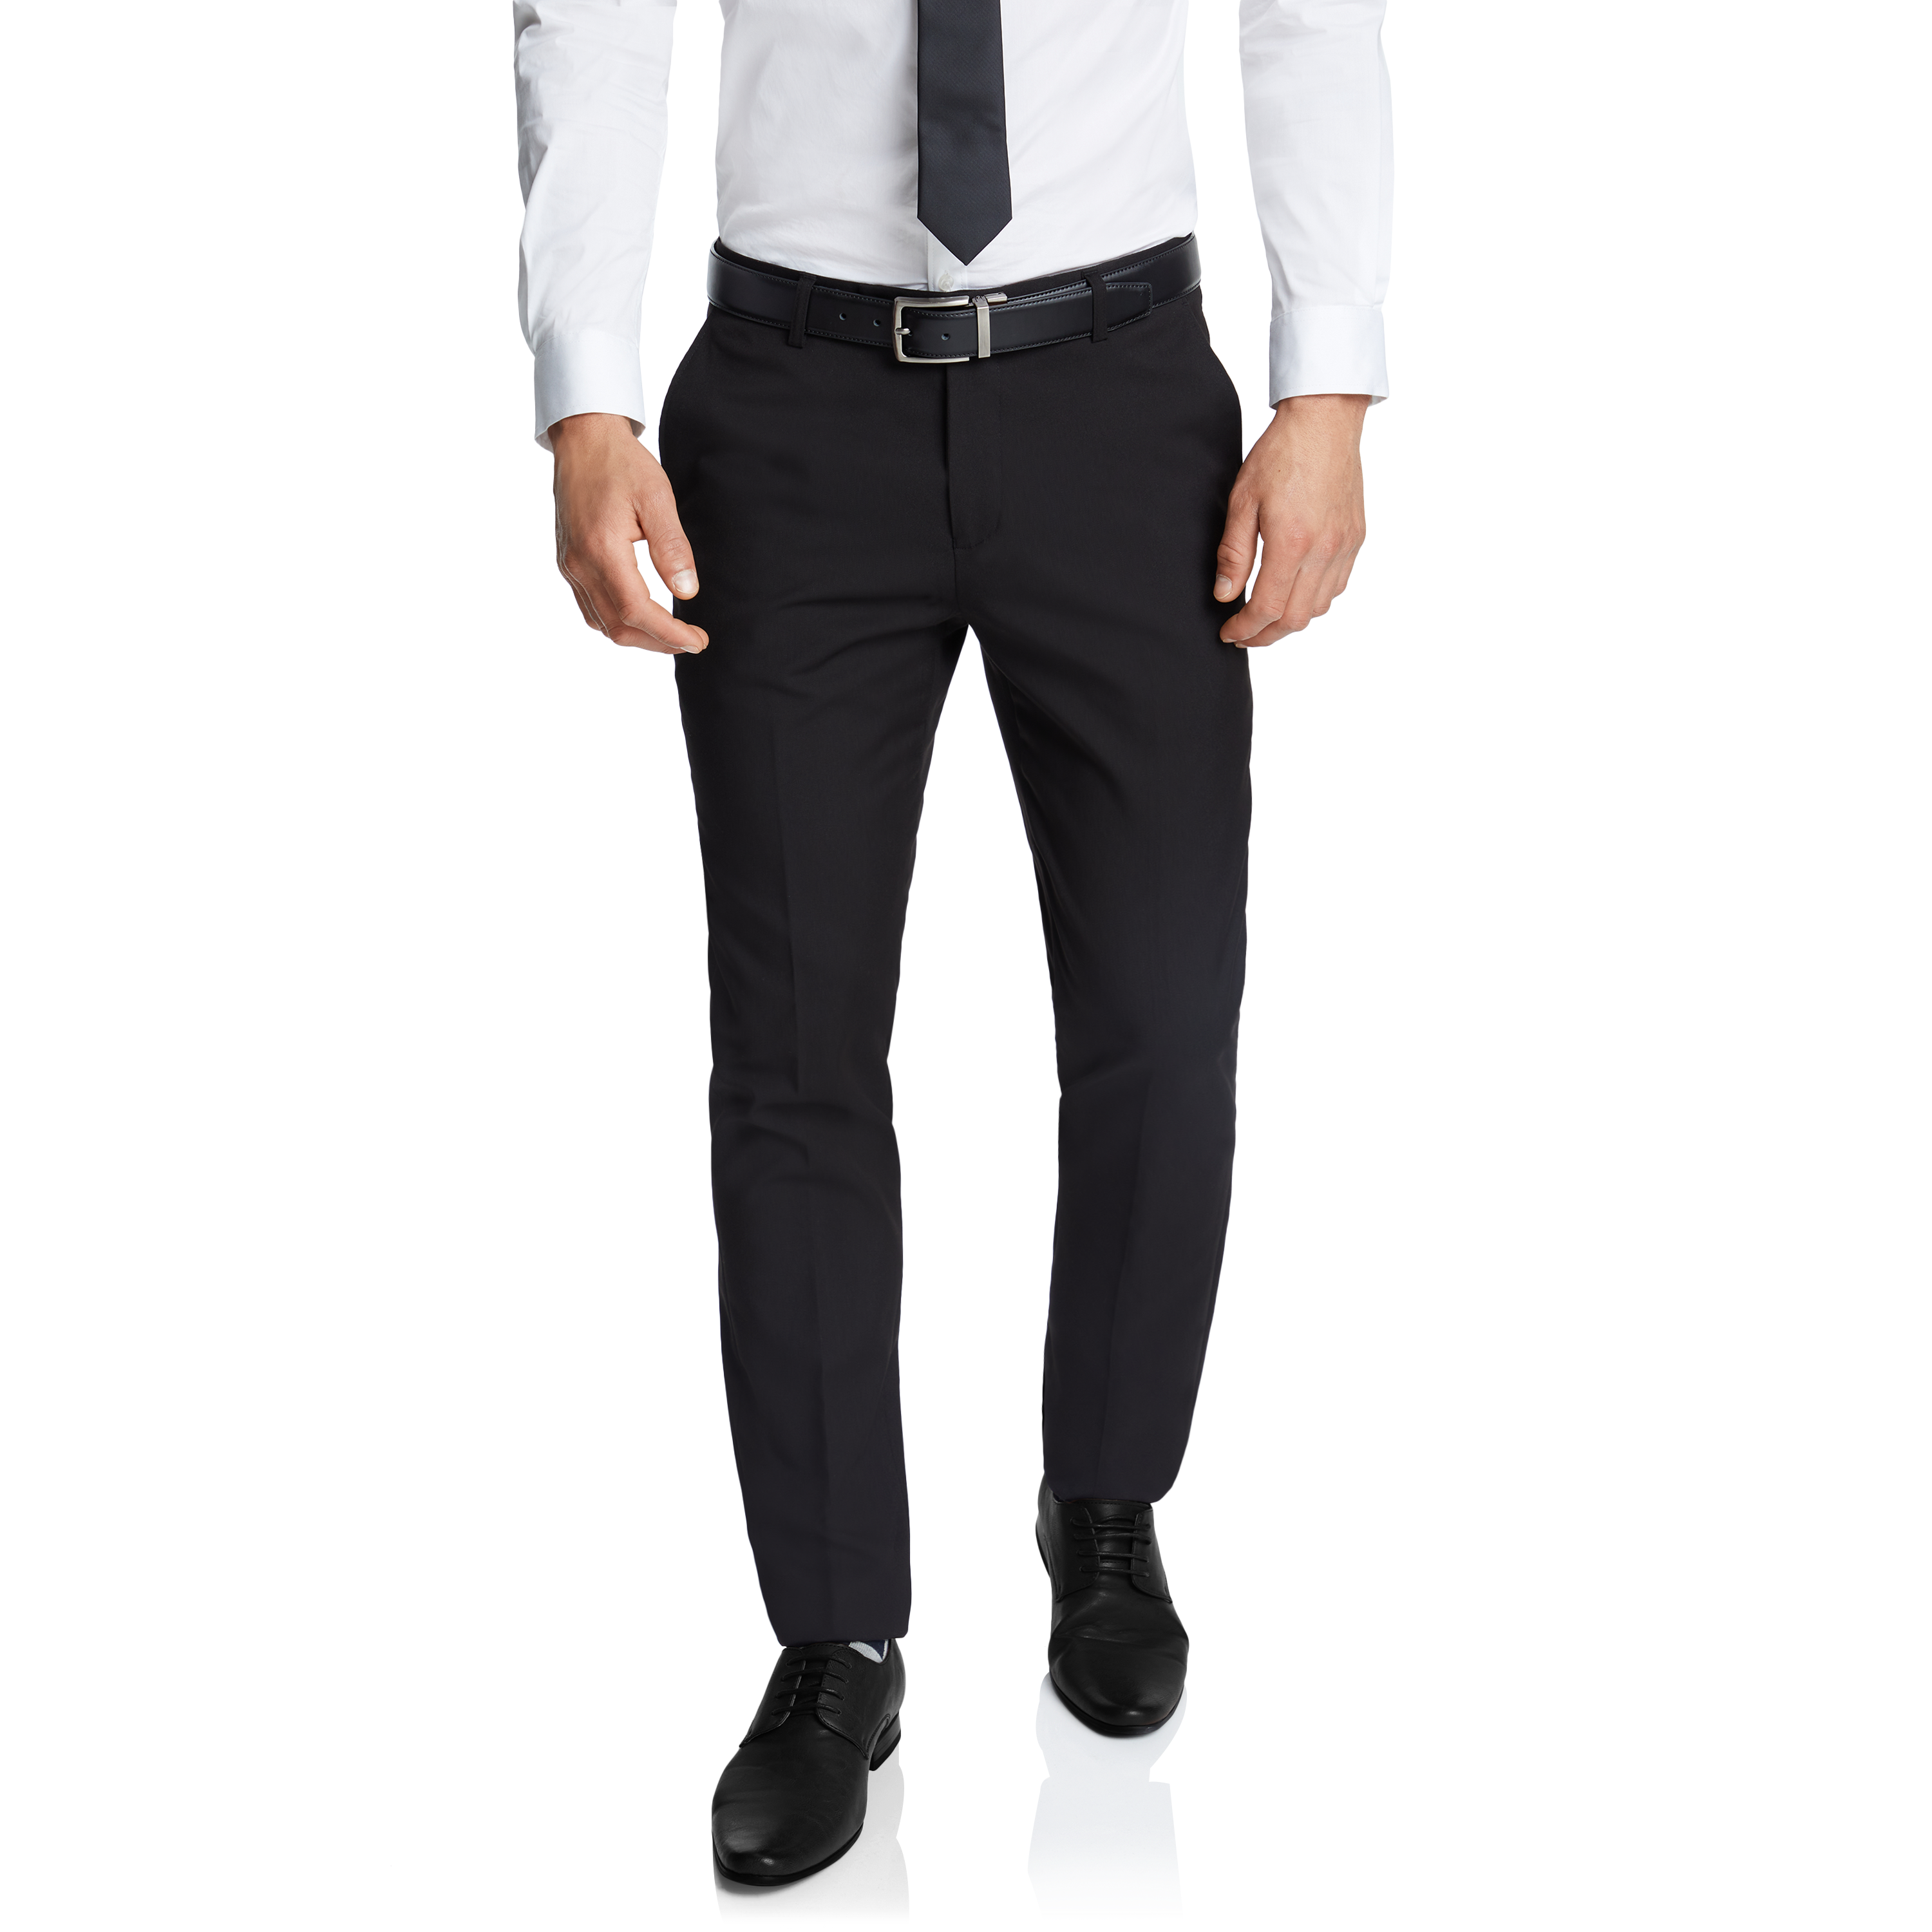 Buy Mens Slim Fit Stretch Flat-Front Skinny Dress Pants Gray Plaid with  Tape Side (Black Tape Side, XL) at Amazon.in